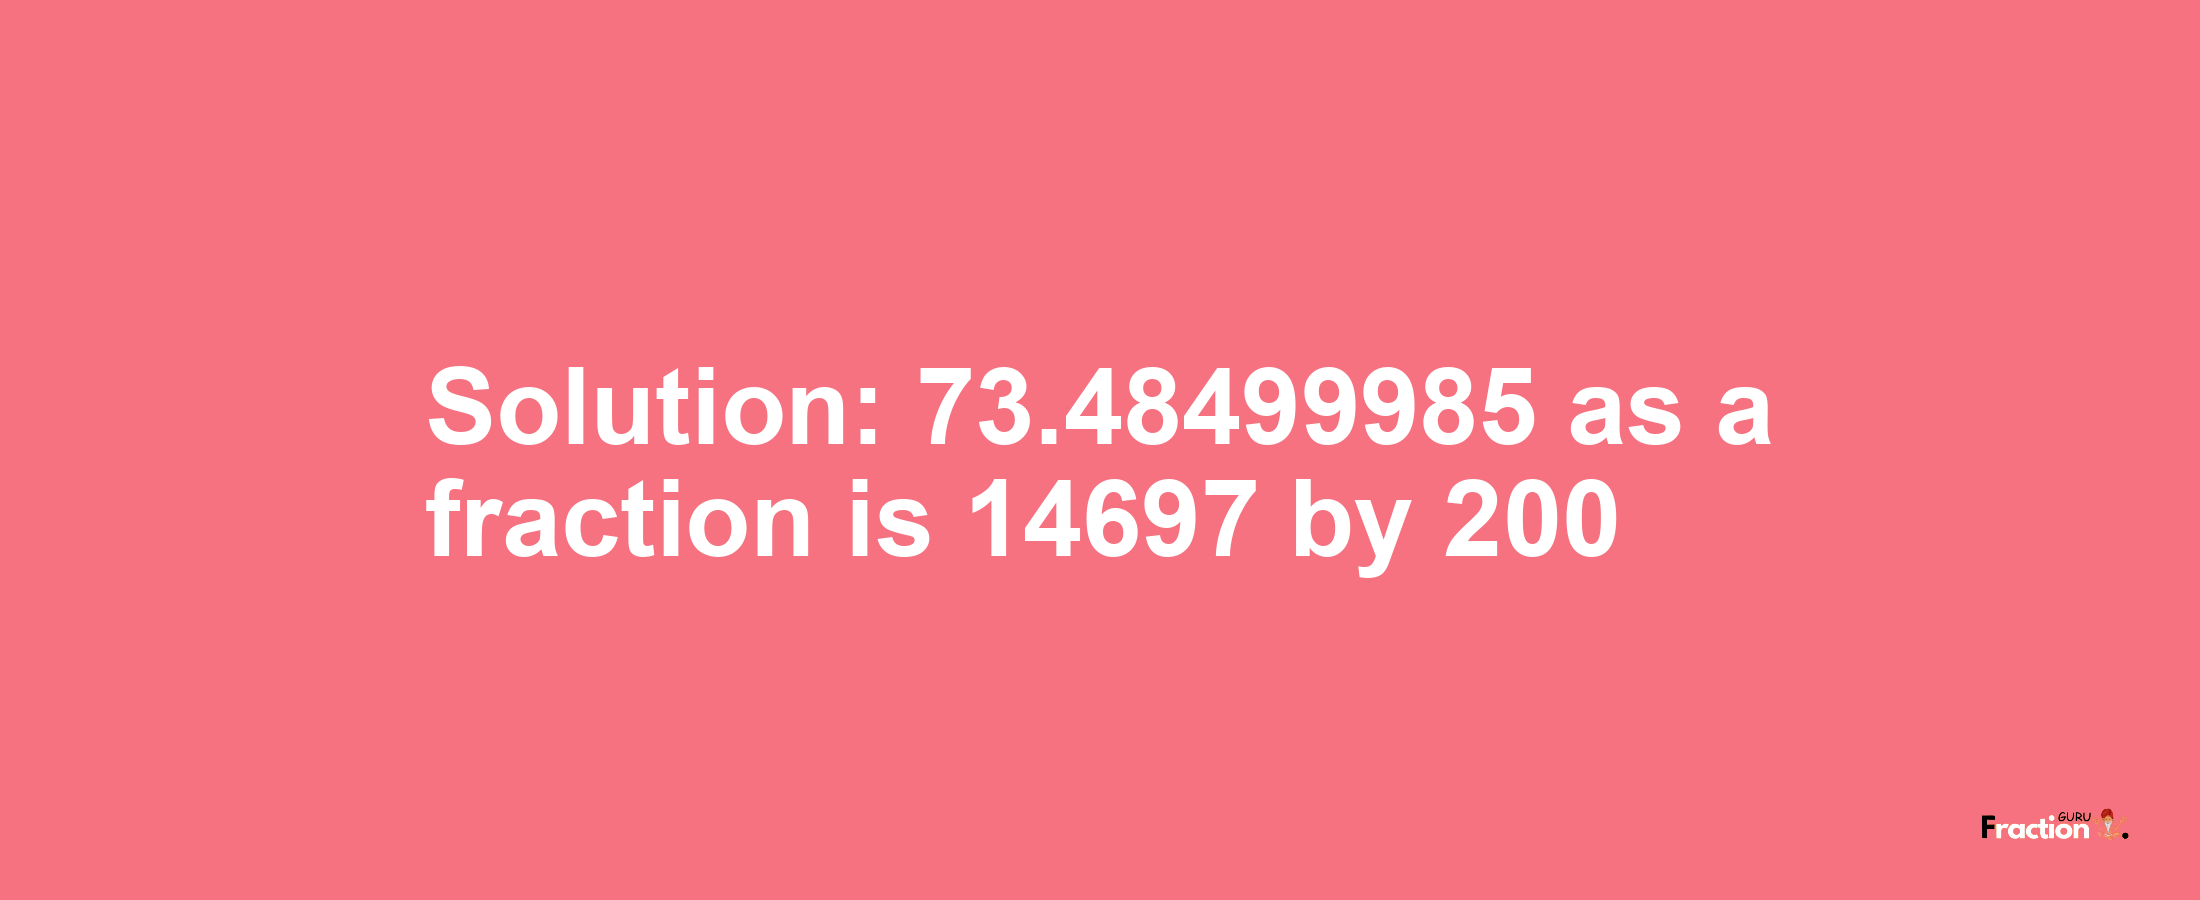 Solution:73.48499985 as a fraction is 14697/200